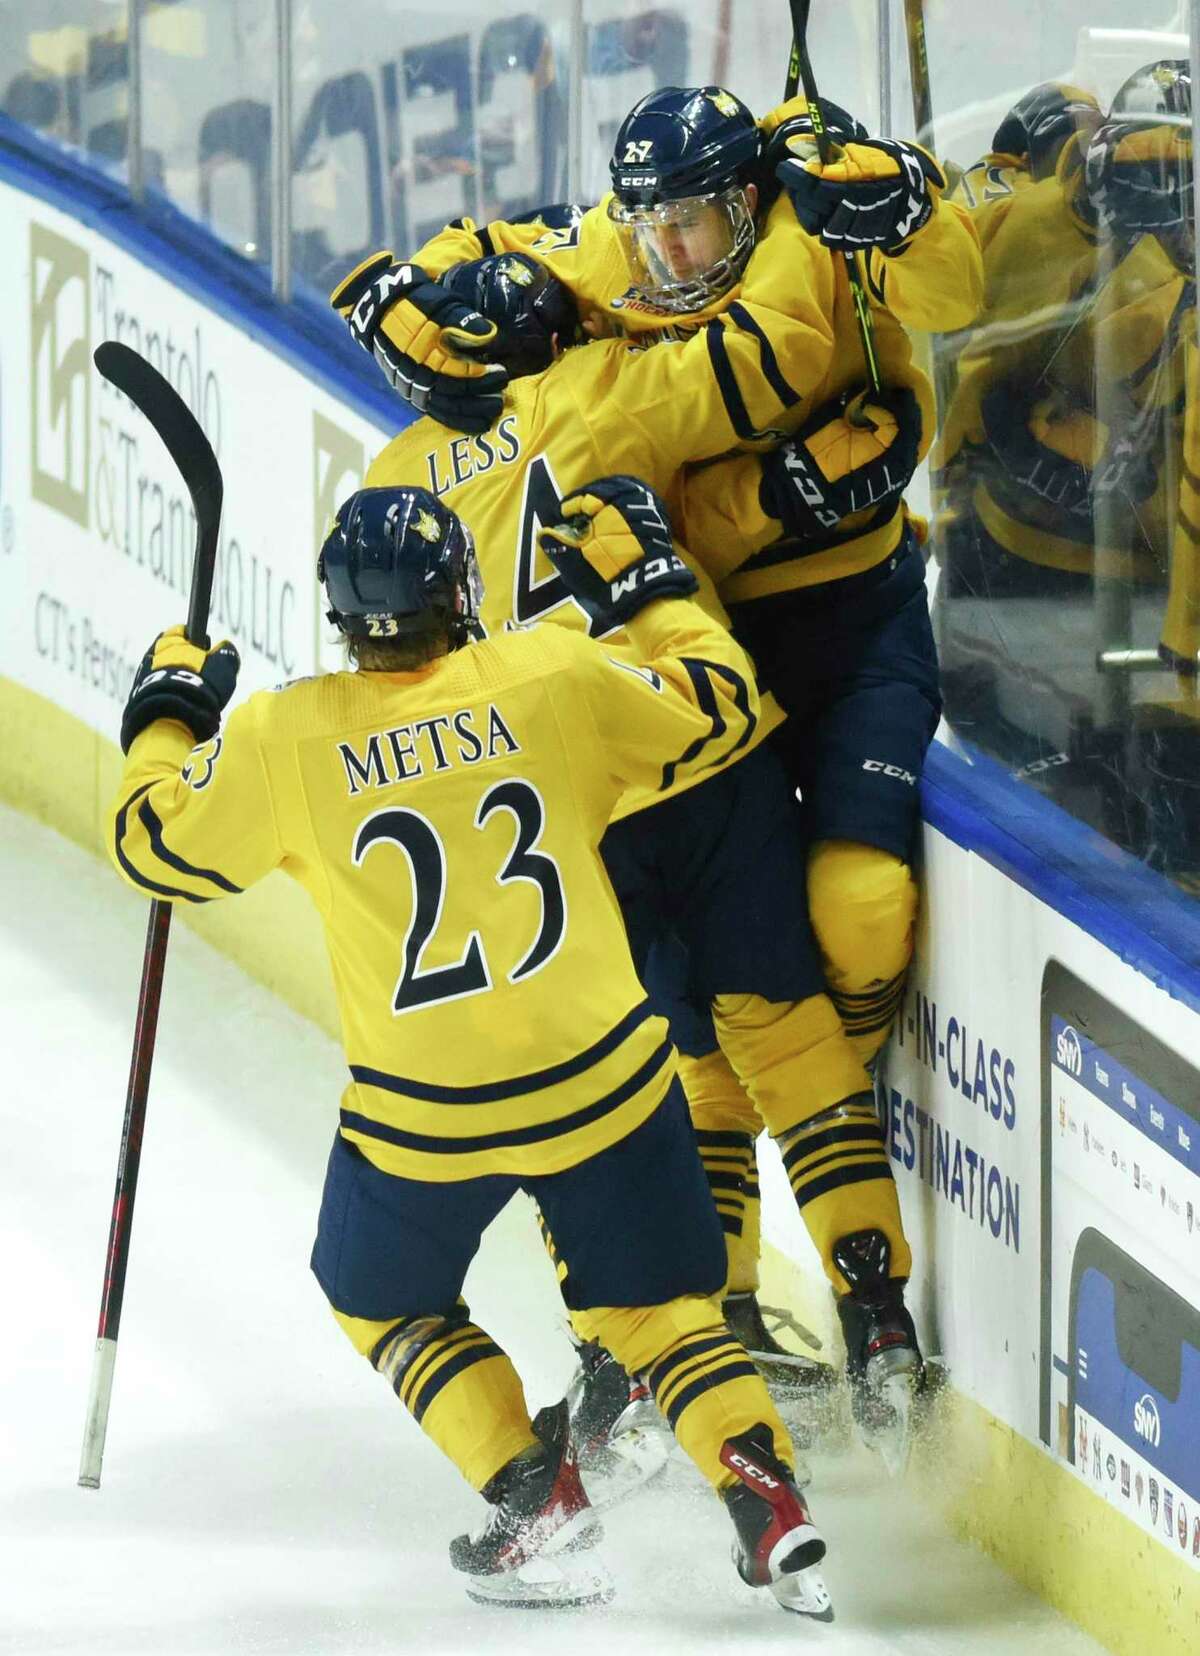 Quinnipiac's Zach Metsa (23) leads a Bobcats defense corps that, going into the first round of the NCAA tournament, has allowed only 1.1 goals a game.